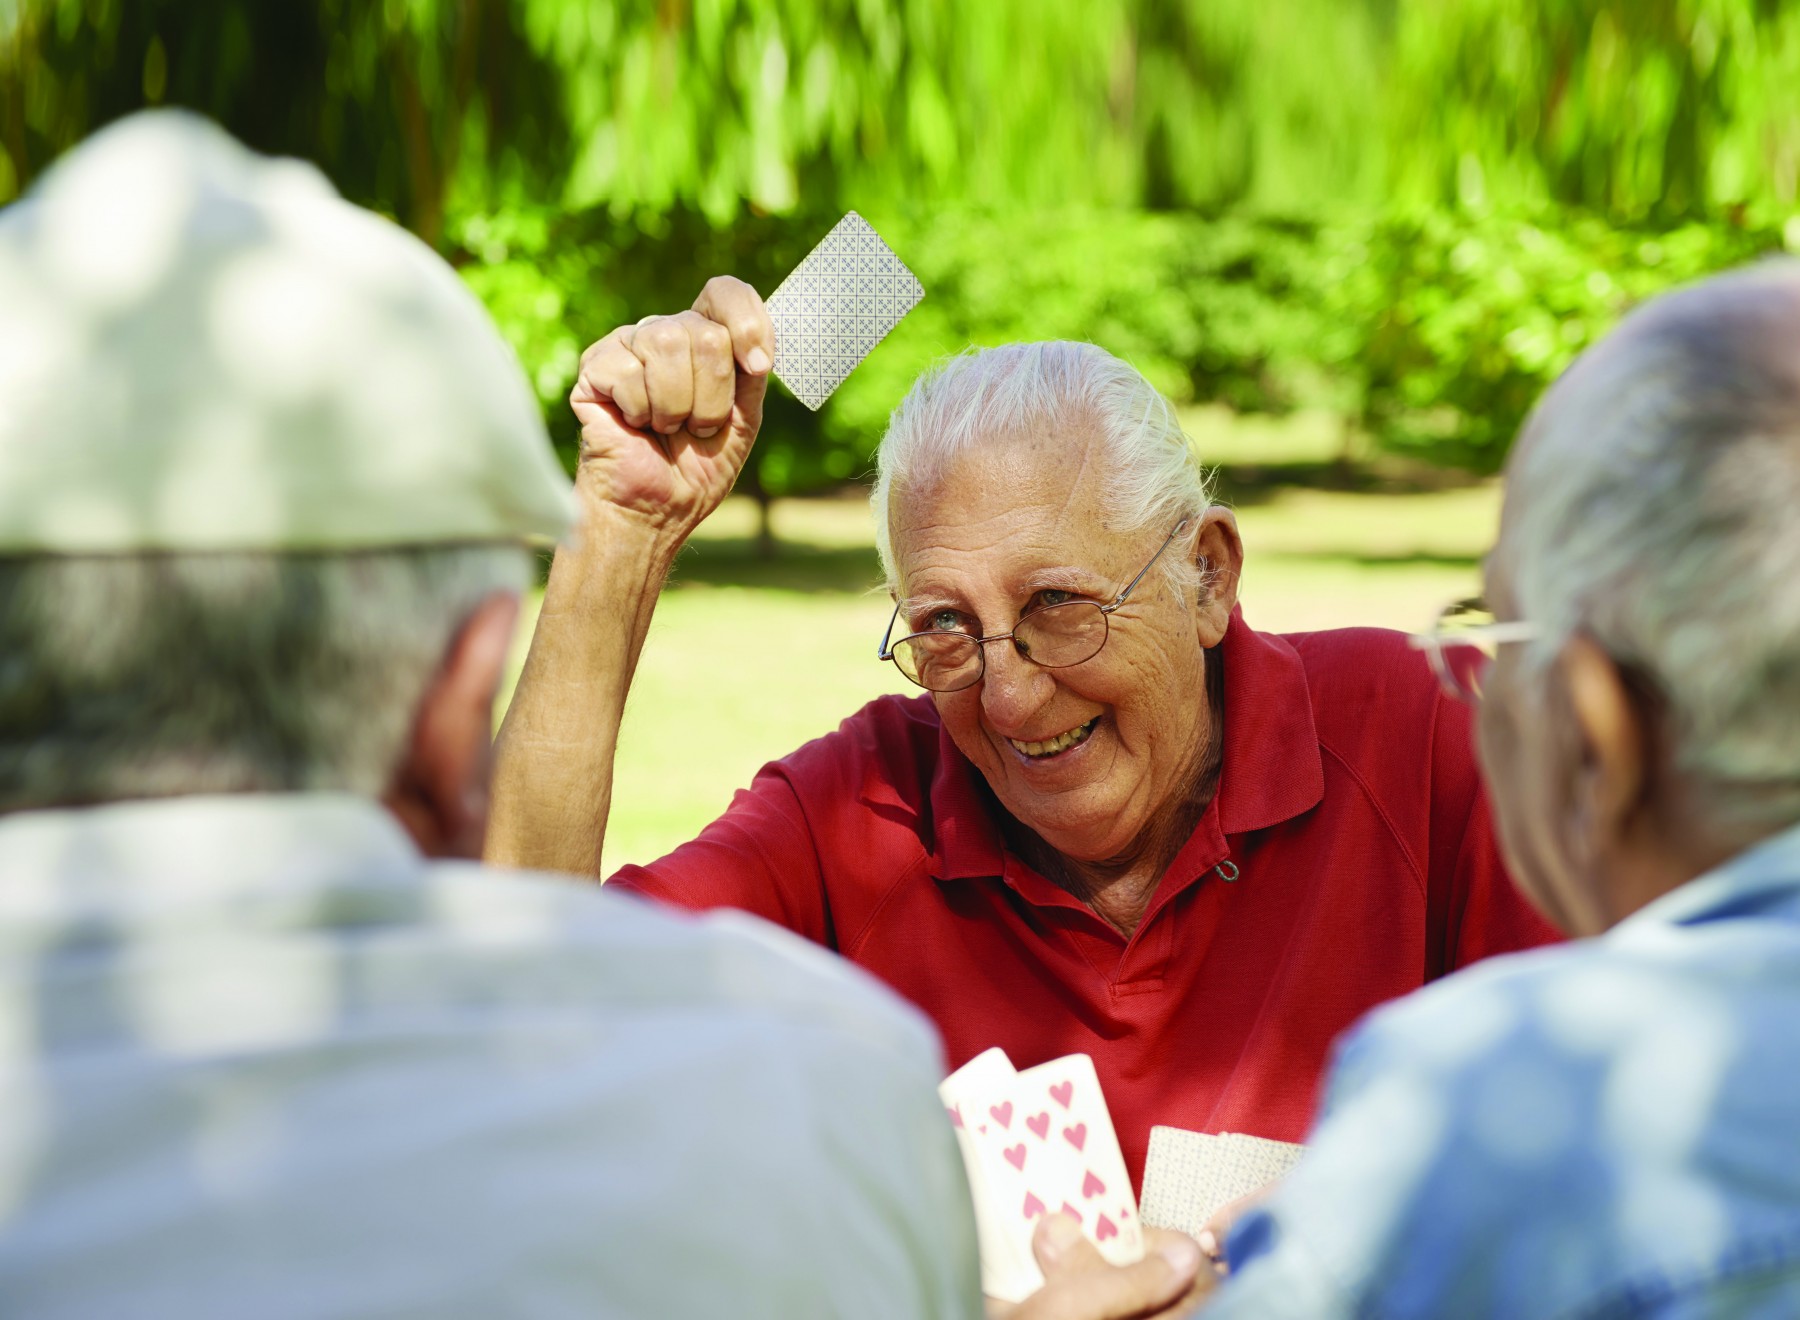 Active and Socially Connected – Health and Wellbeing in Later Life